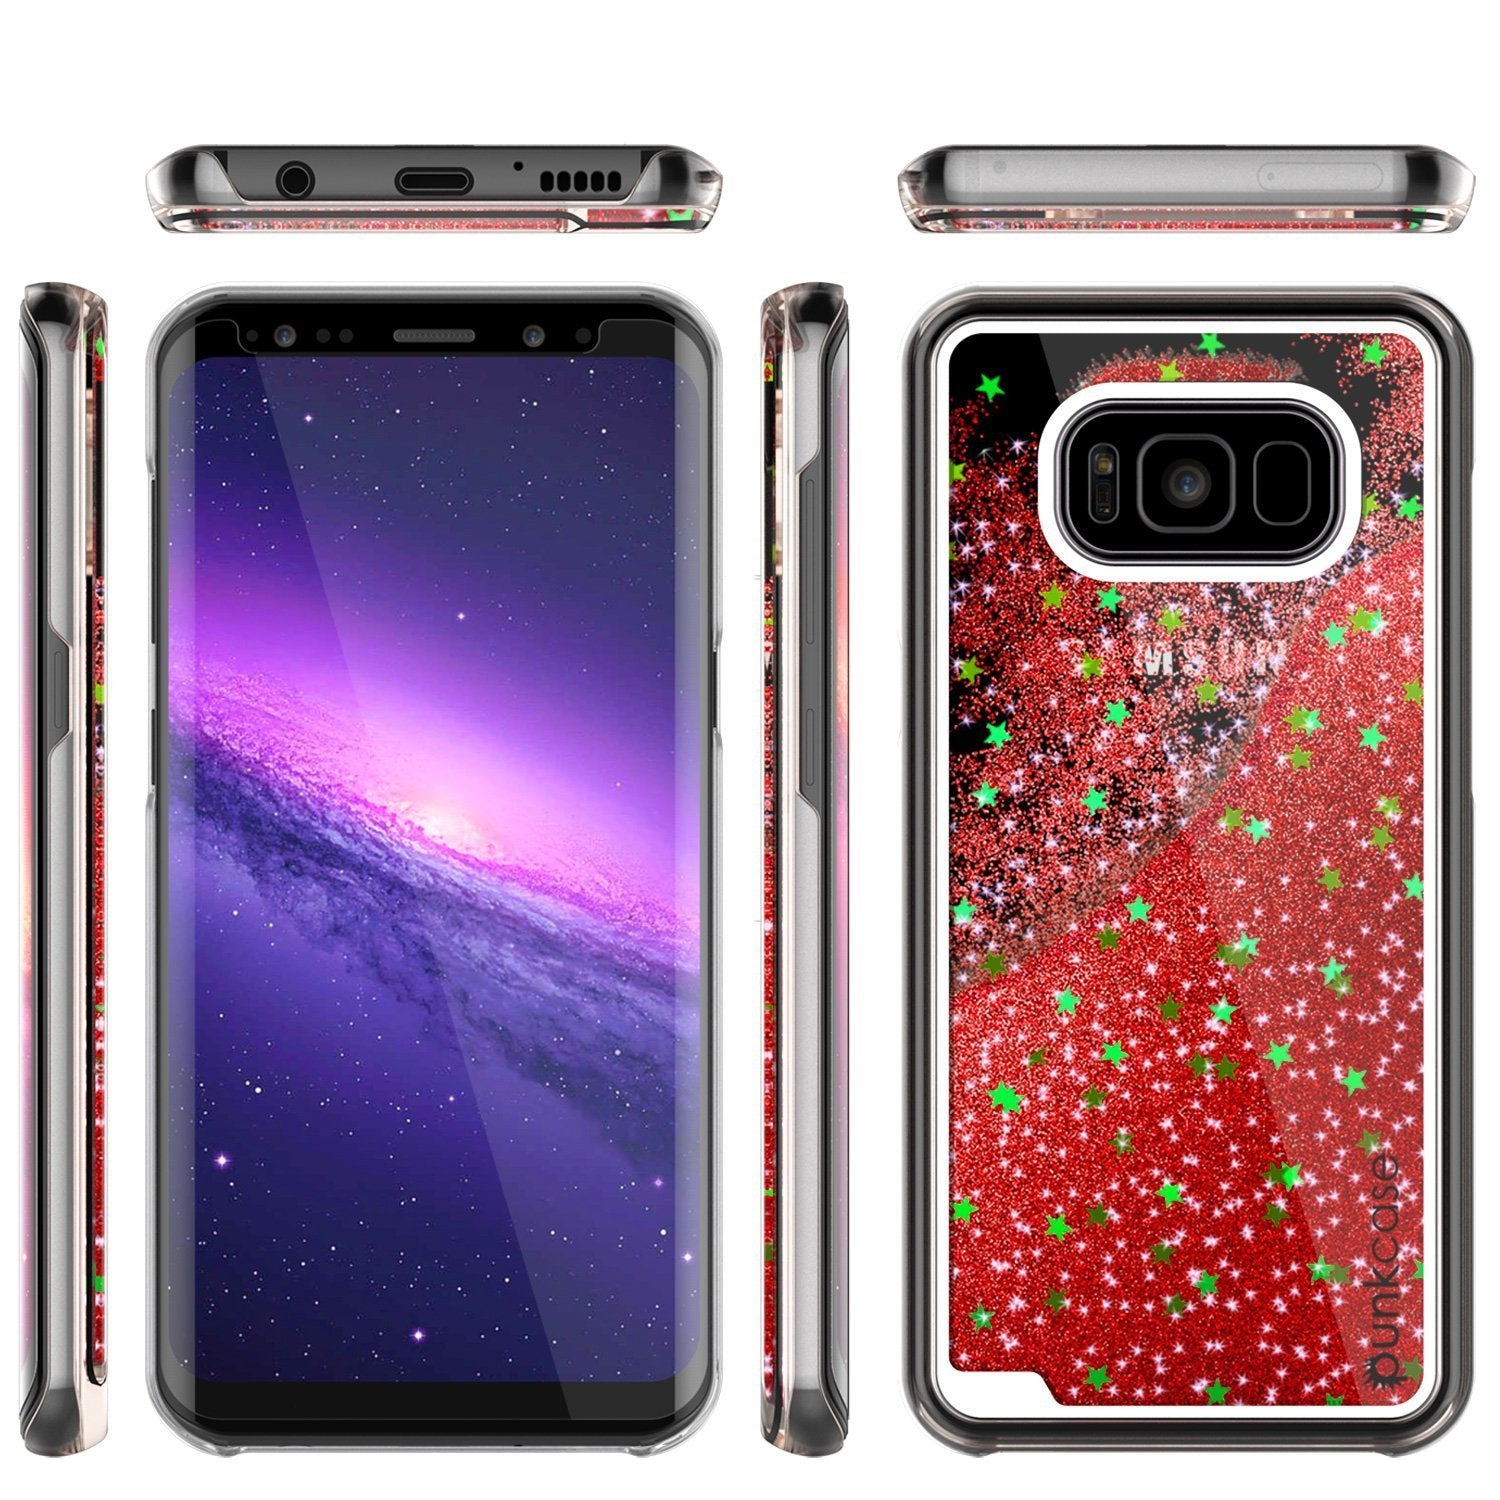 Galaxy S8 Case, Punkcase Liquid Red Series Protective Dual Layer Floating Glitter Cover